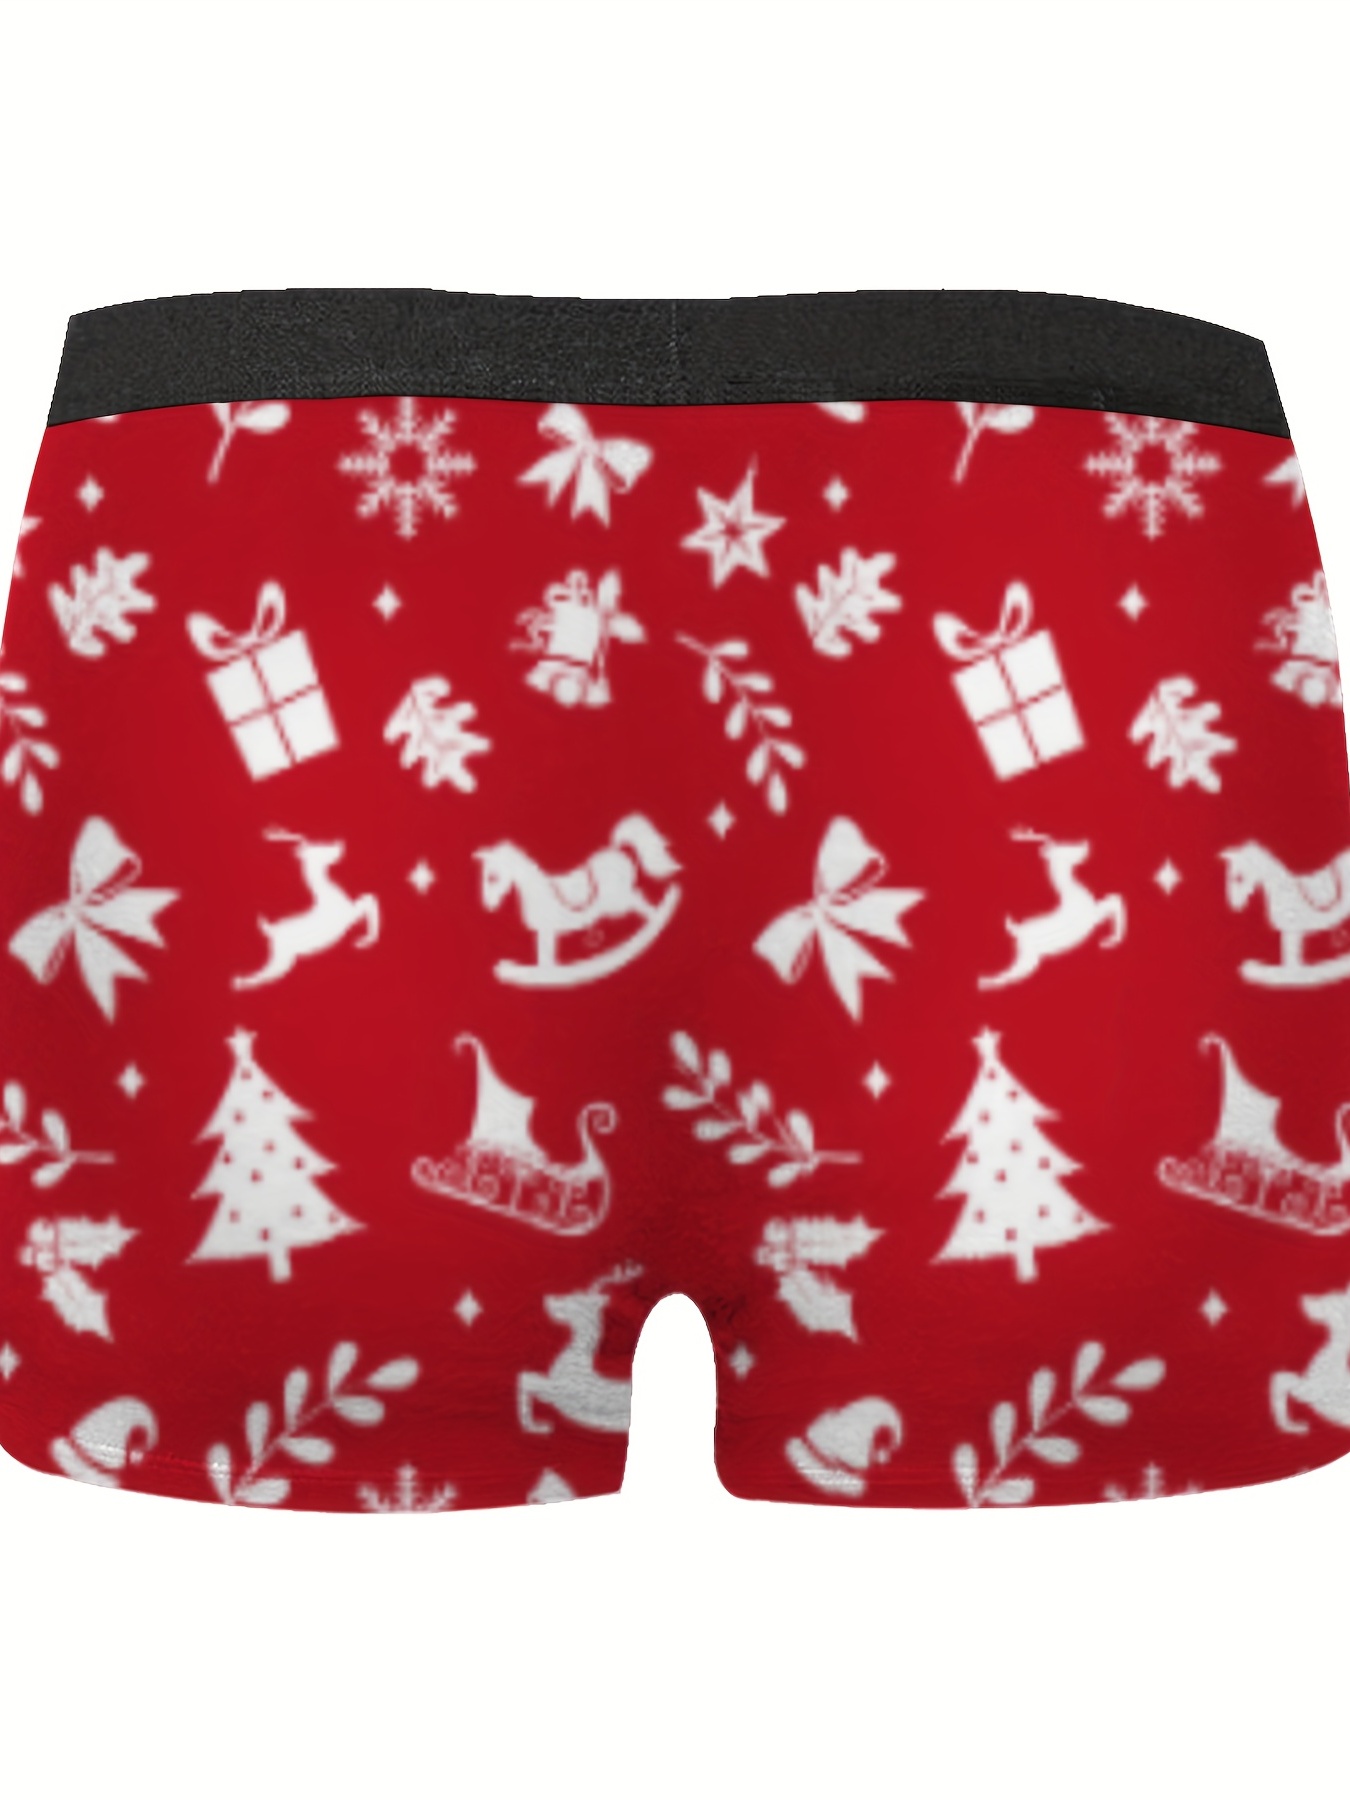 Funny Boxer Briefs for Men Breathable Christmas Underwear Shorts  Comfortable Xmas Print Slim Fit Sports Trunks Panties 